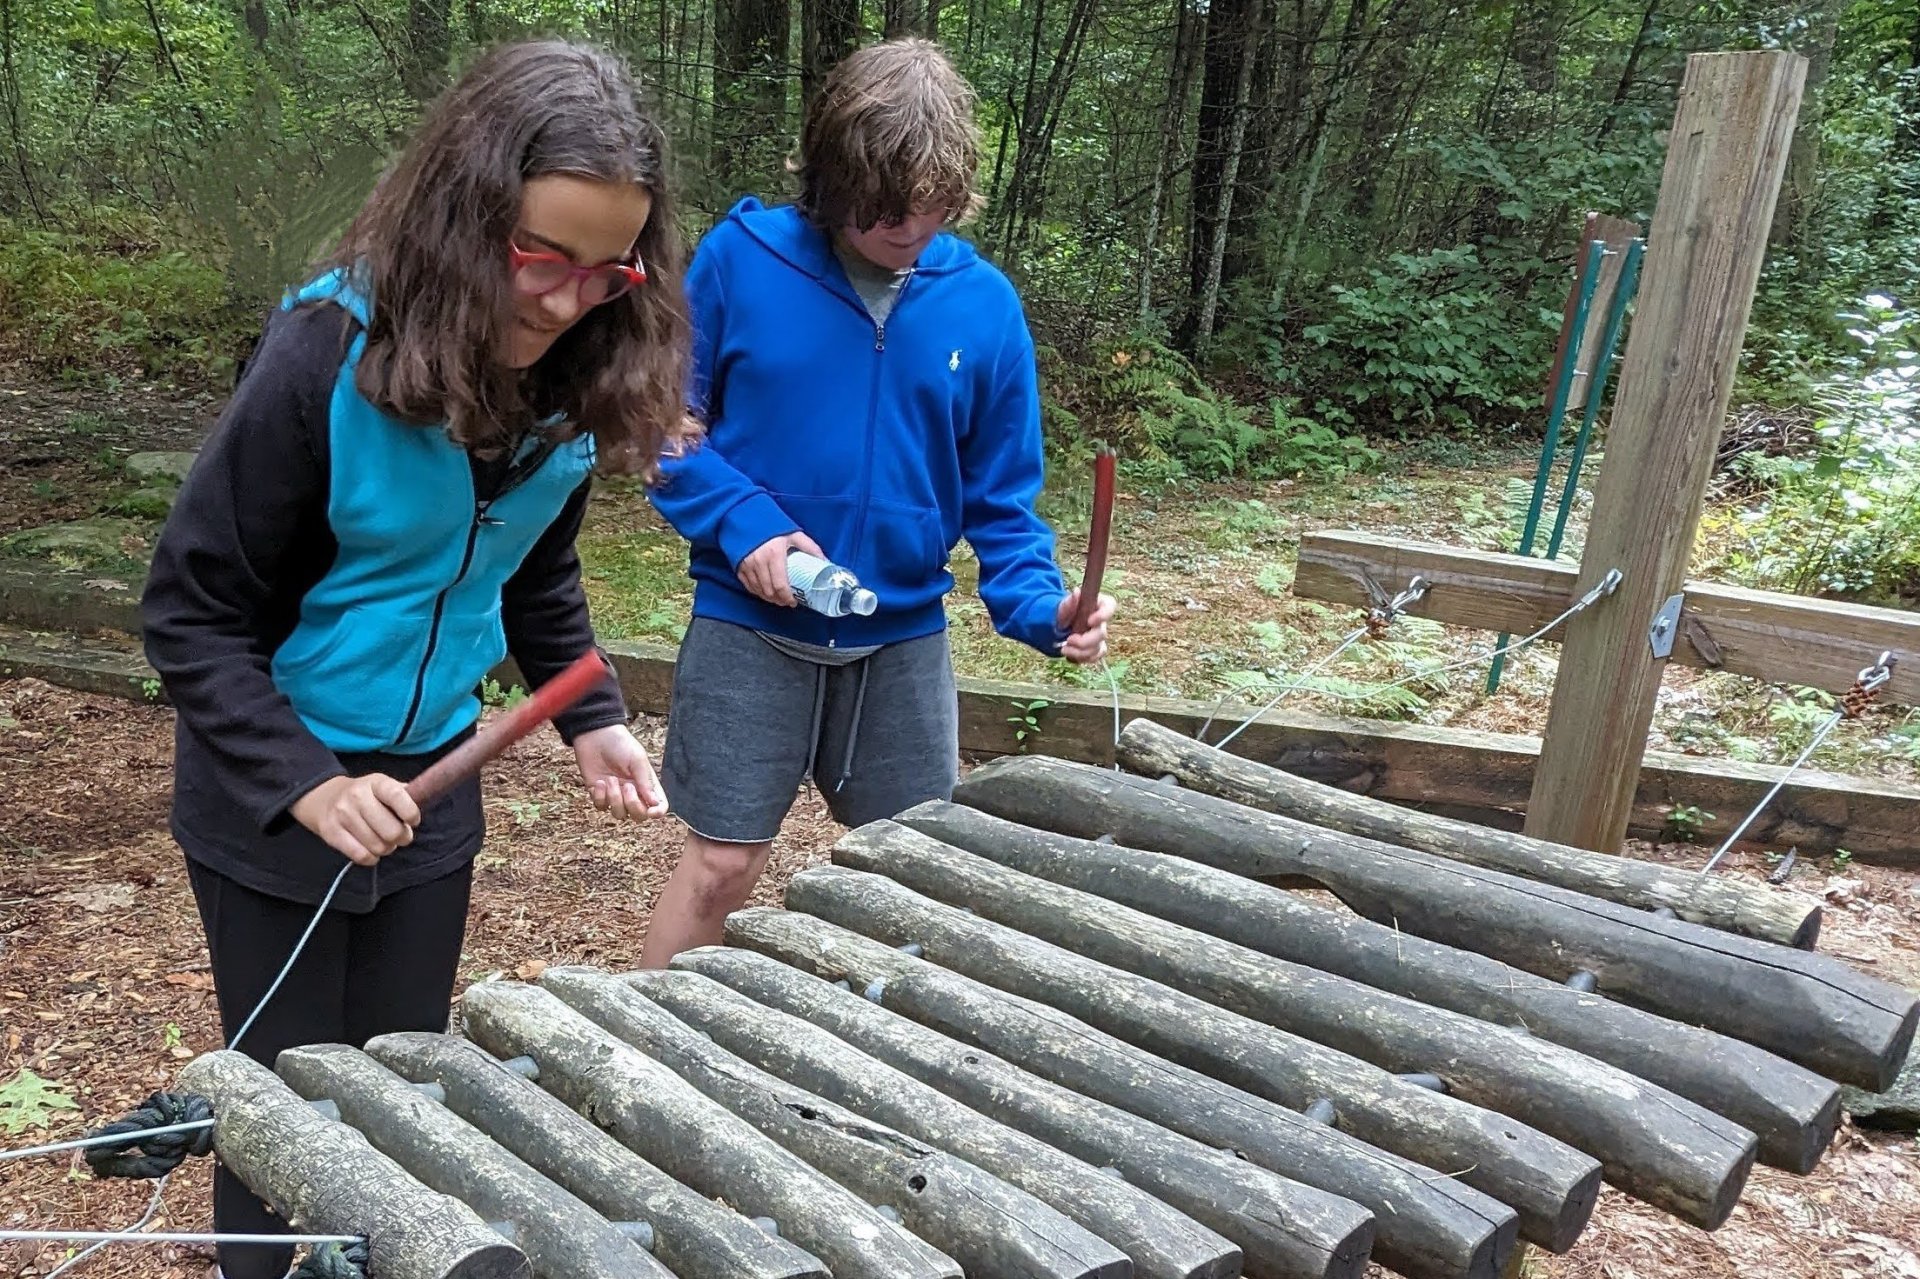 Students play xylophone made of logs outdoors